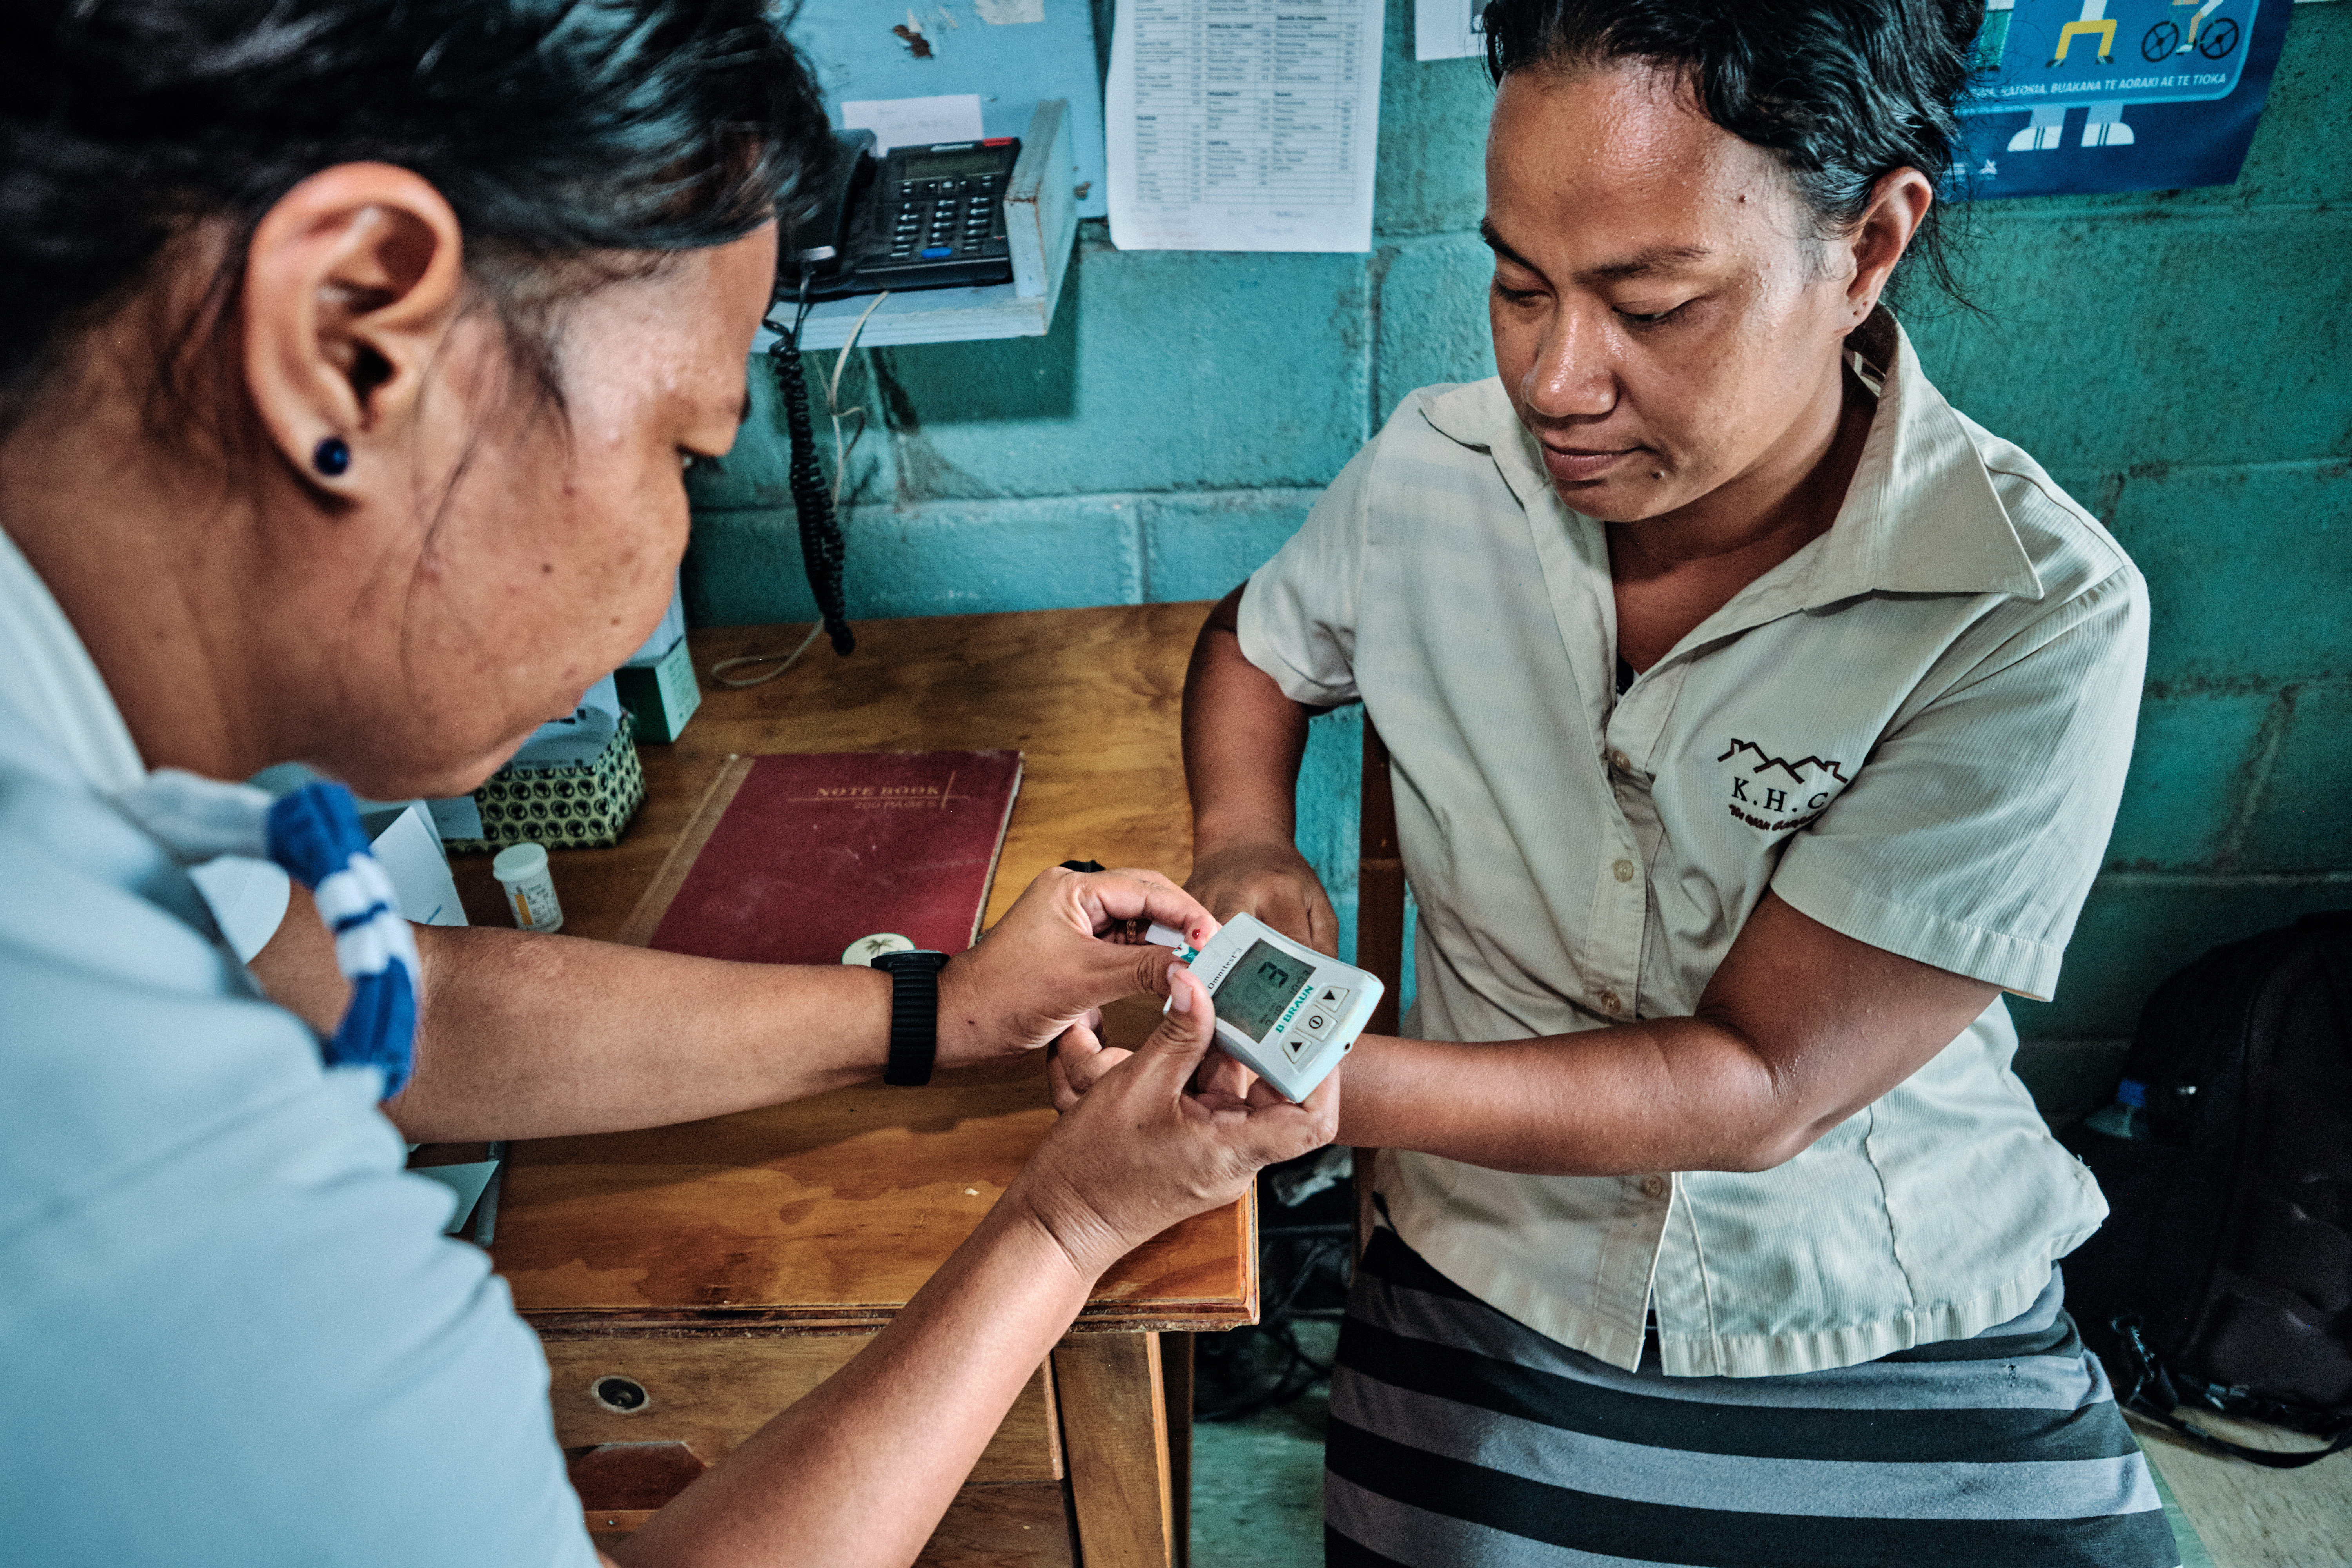 Bridging the Gap on NCDs: From global promises to local progress - Policy brief